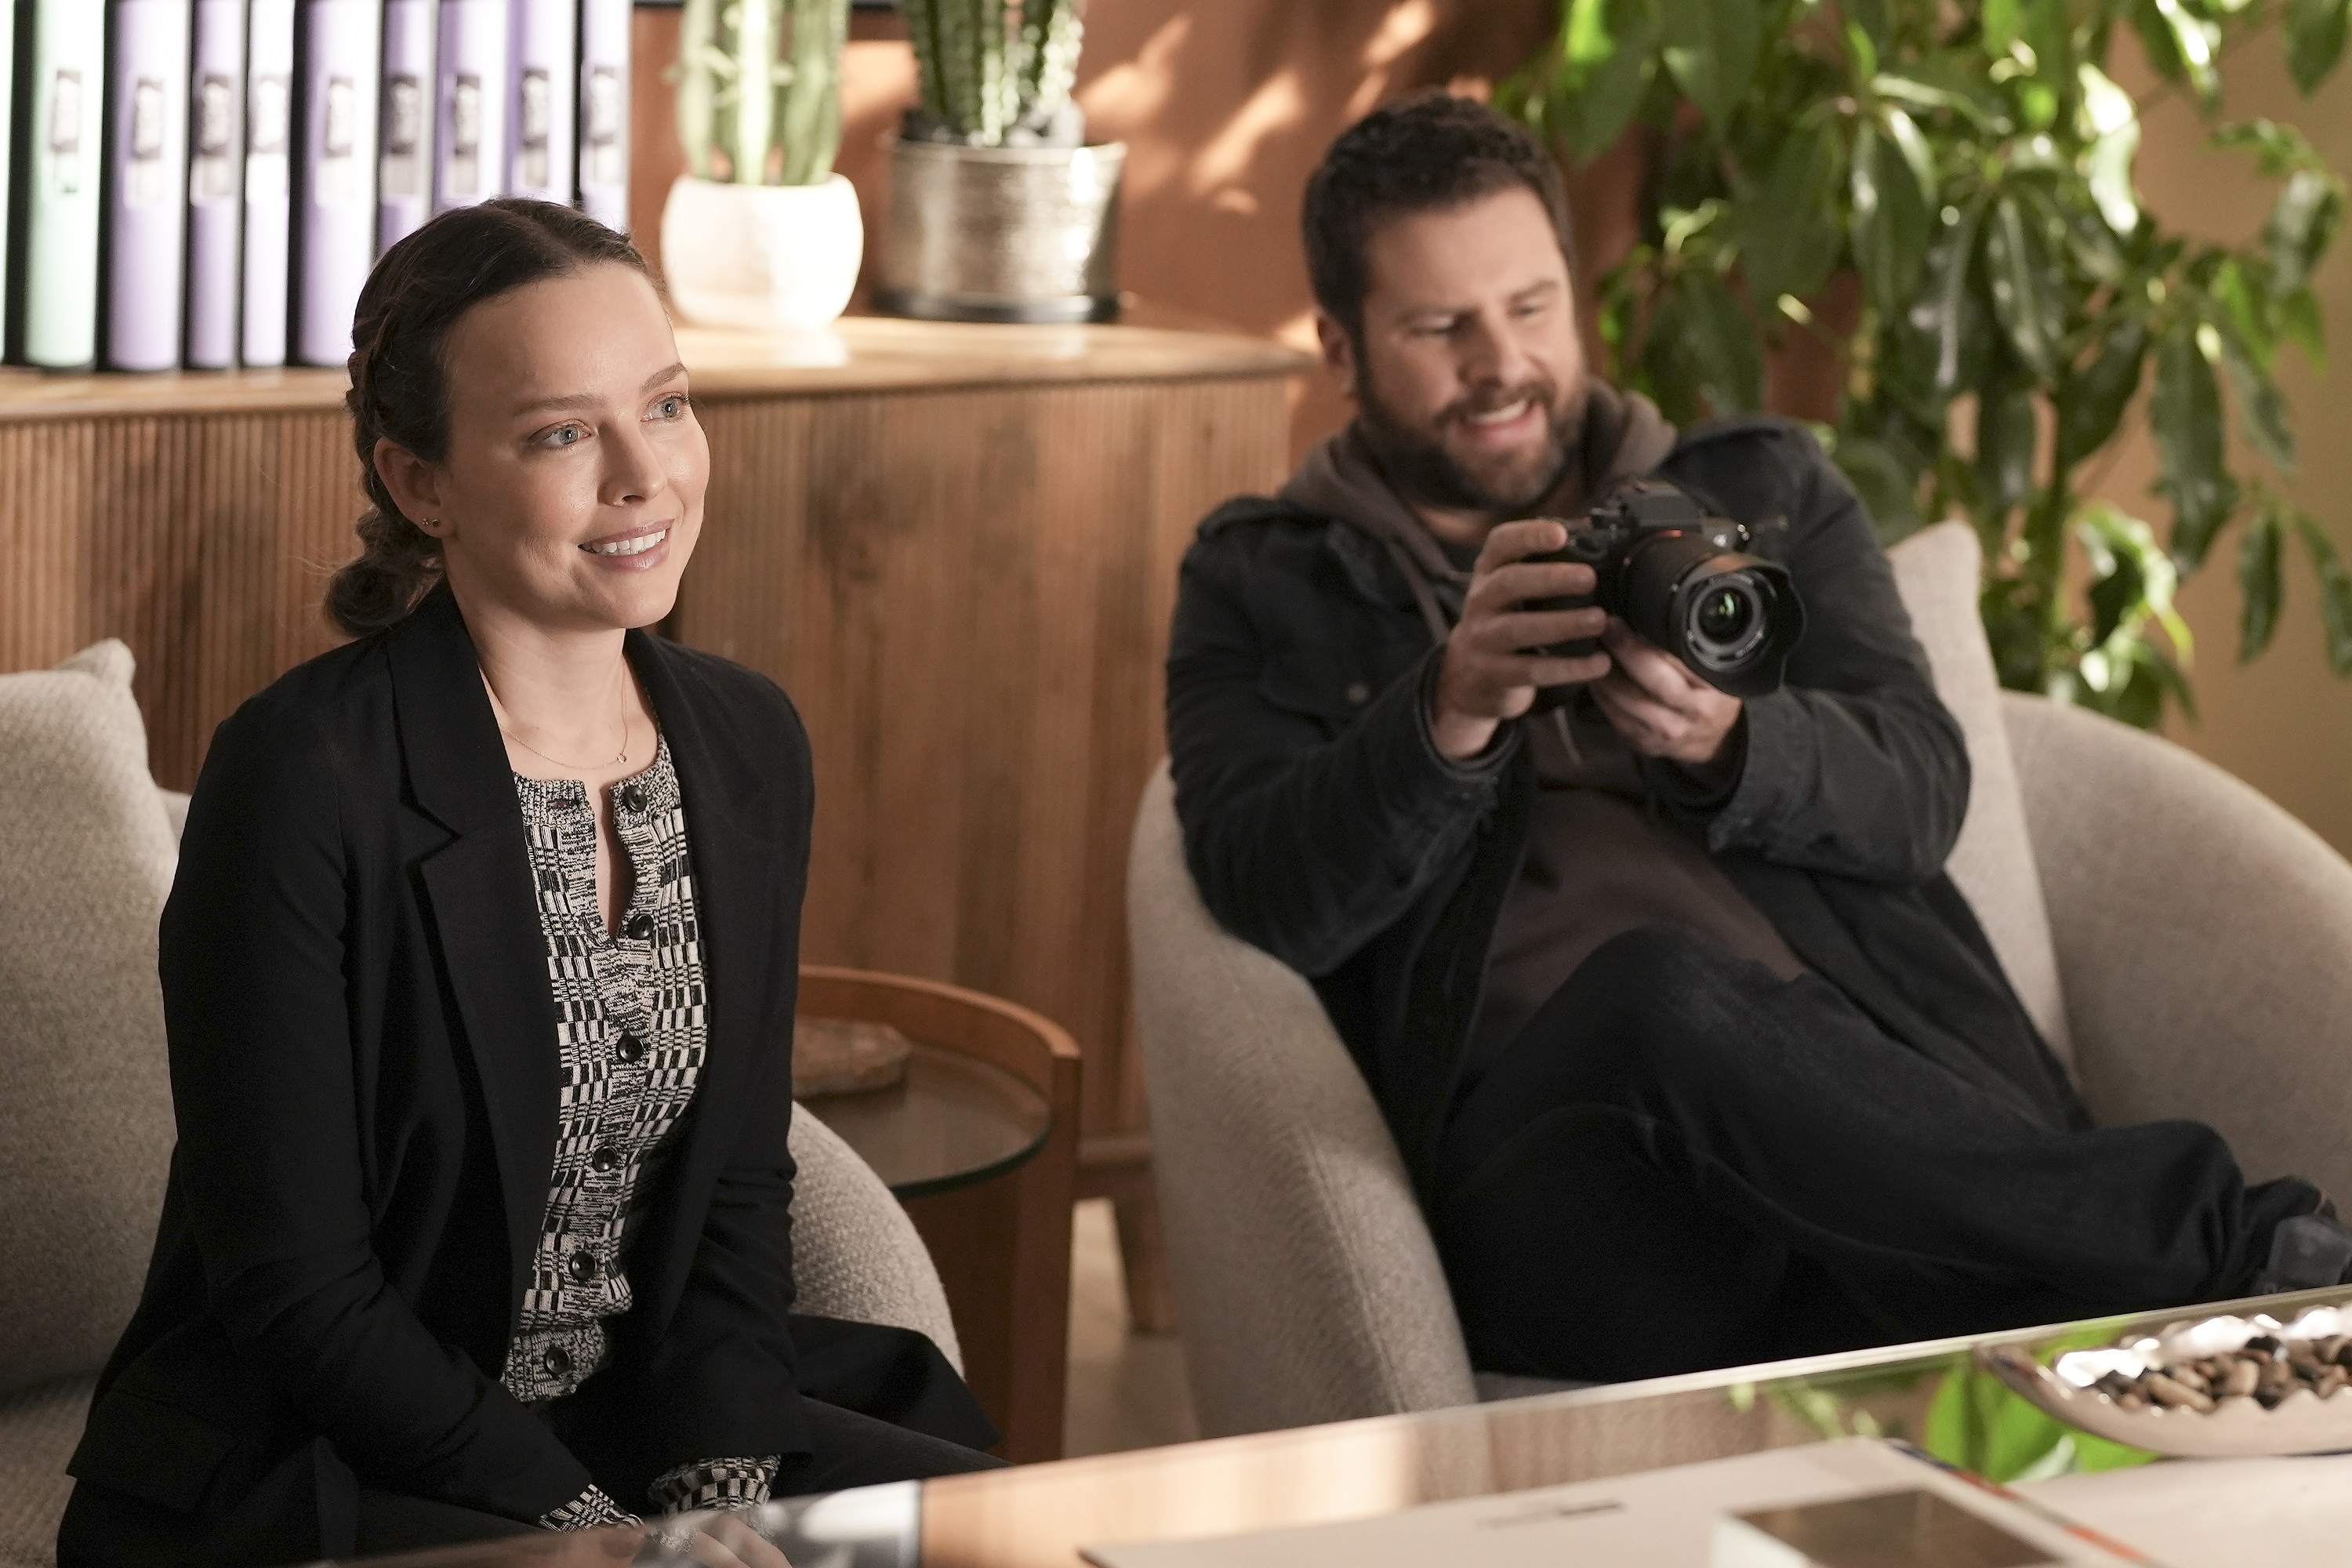 'A Million Little Things' cast member Allison Miller as Maggie Bloom smiling with James Roday Rodriguez as Gary Mendez take a picture